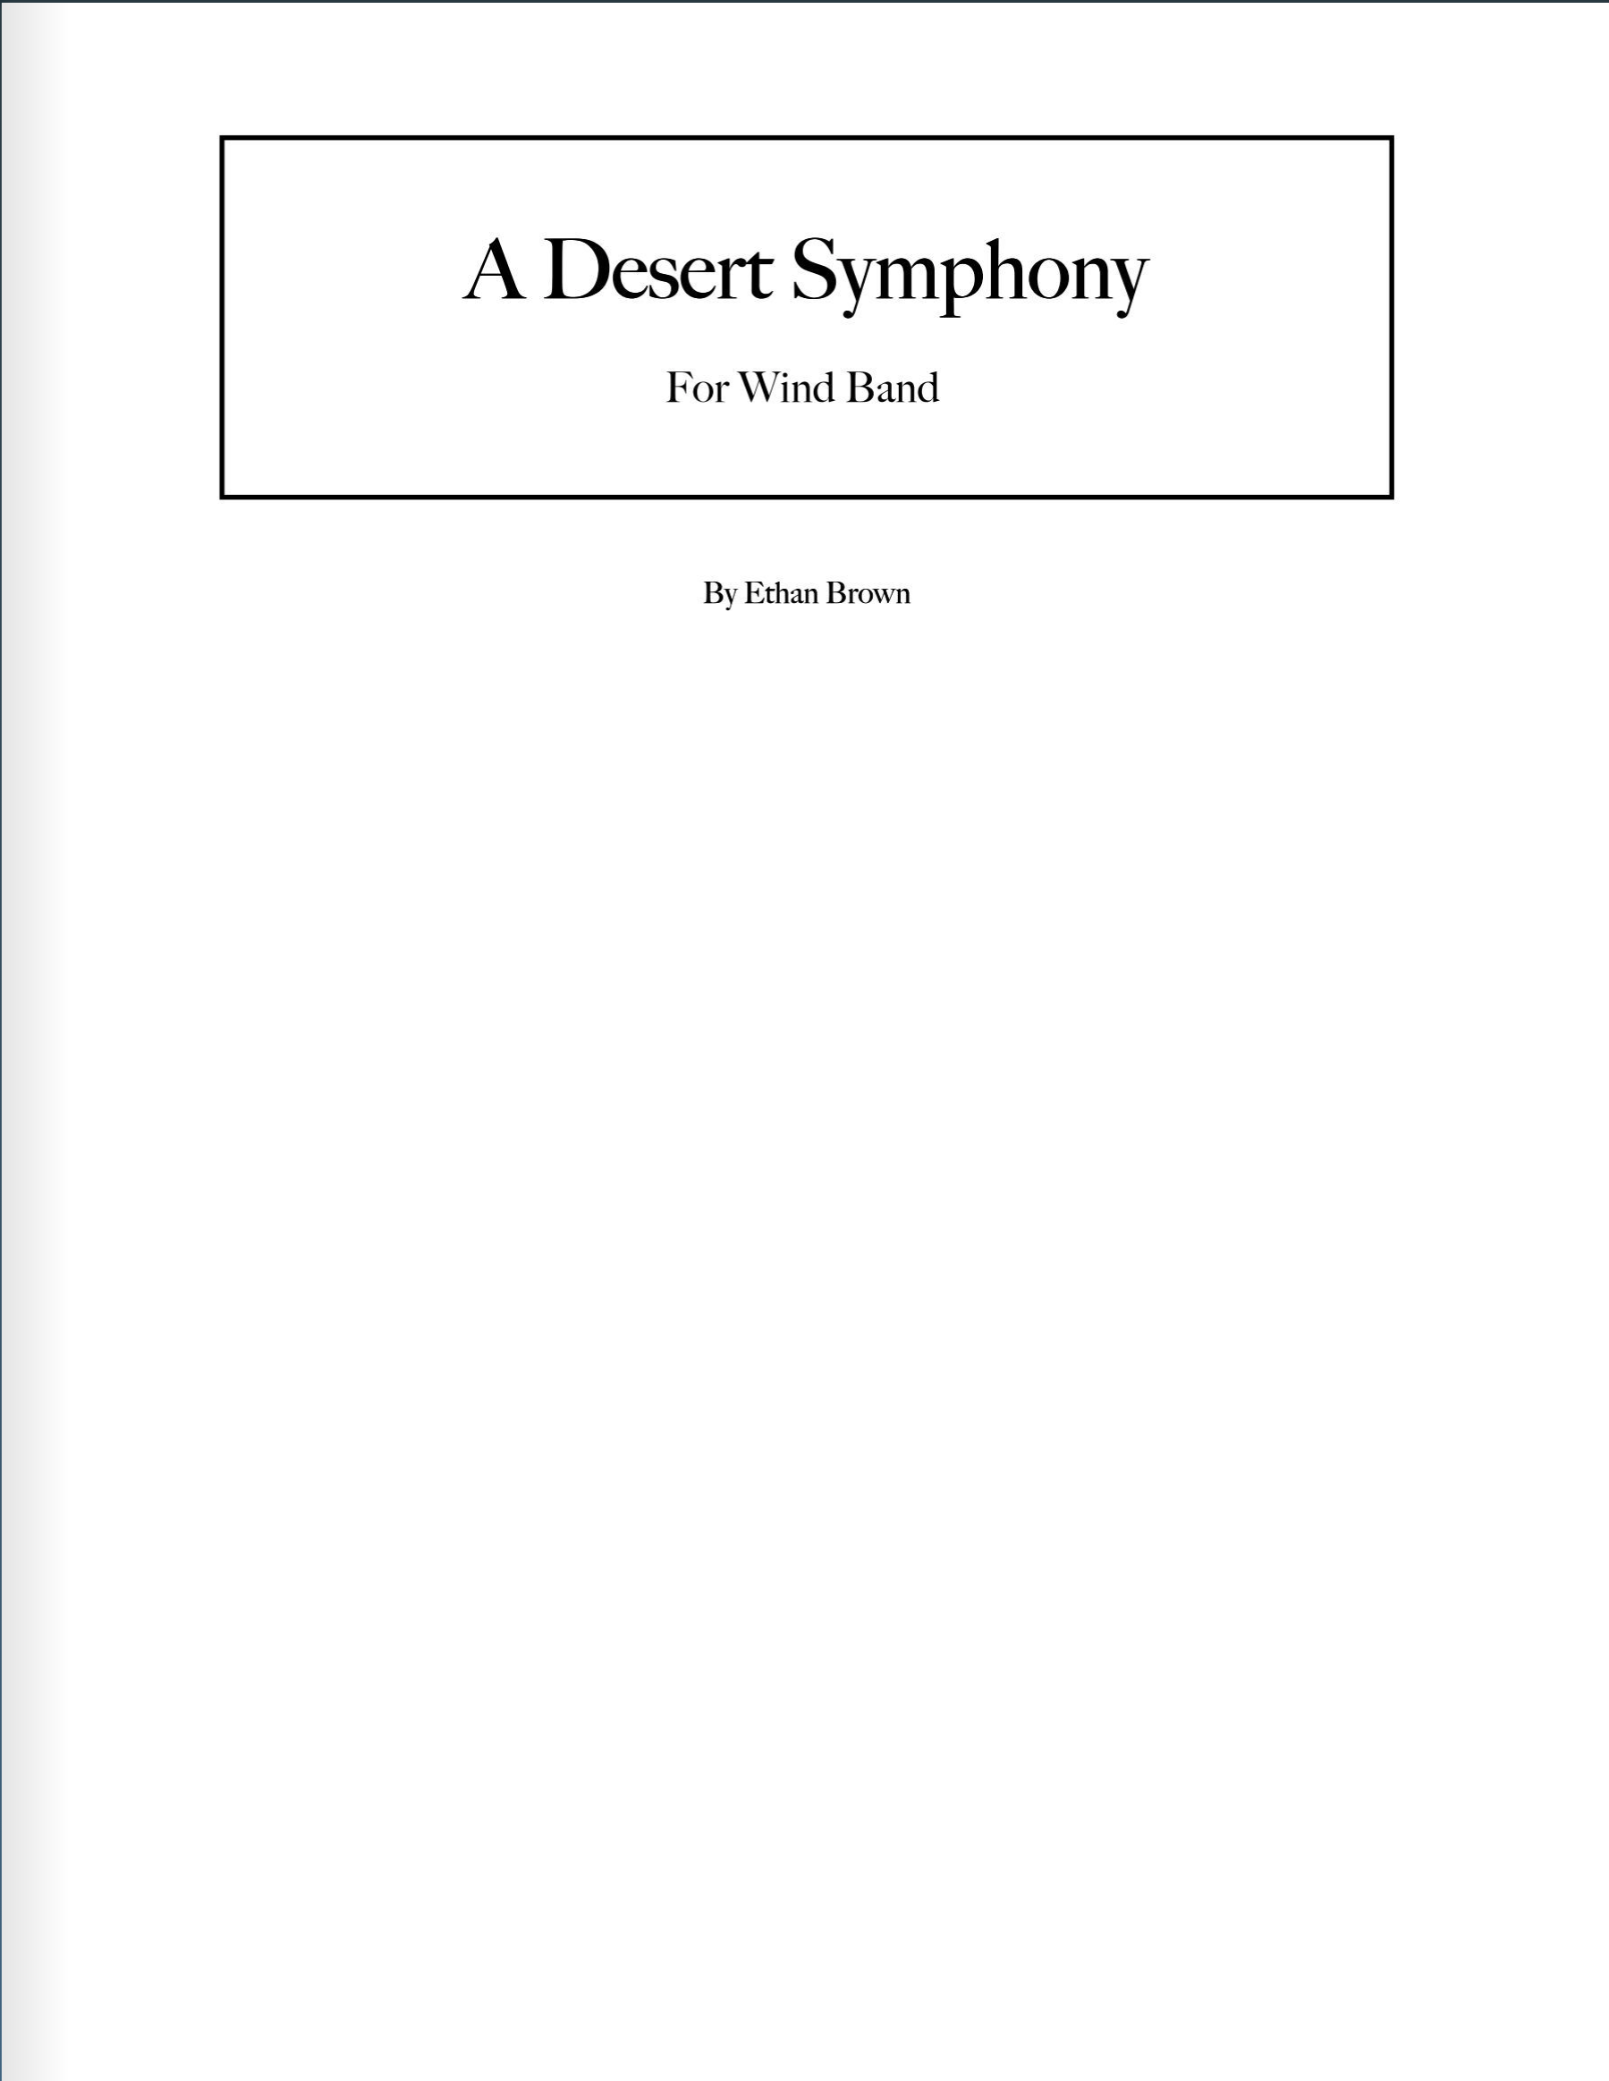 A Desert Symphony by Ethan Brown